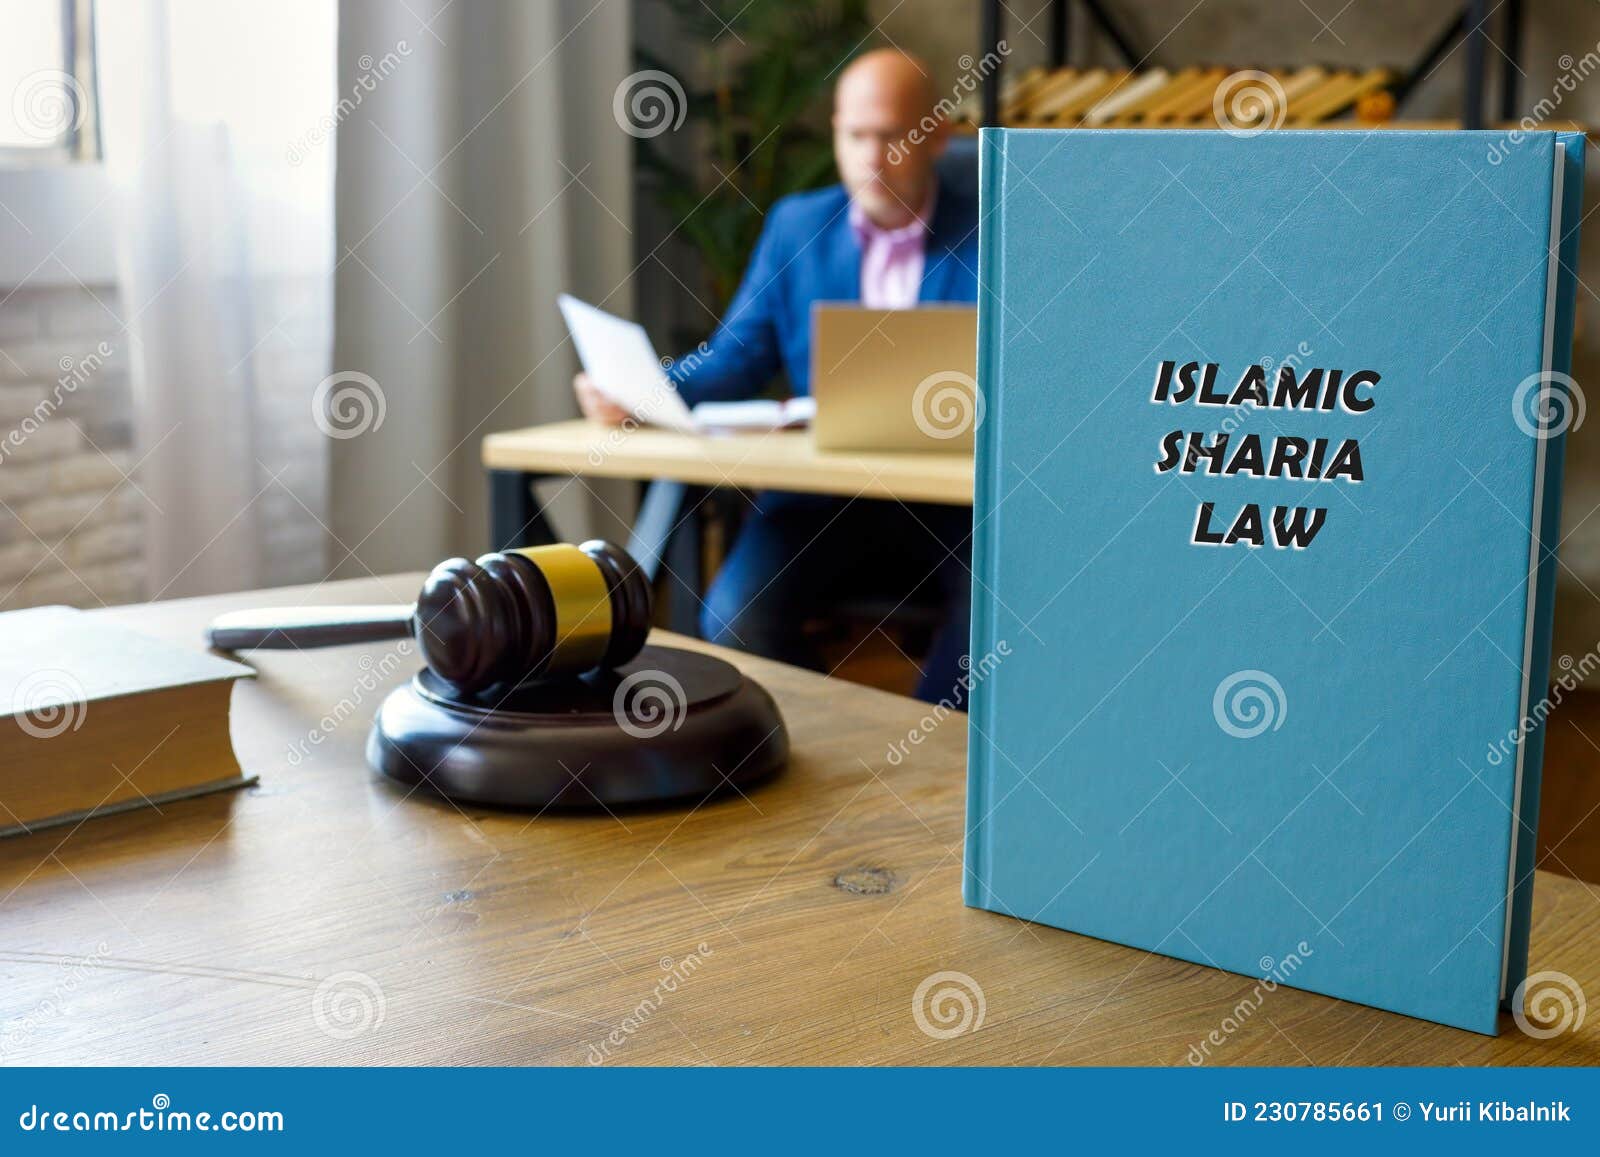 attorney holds islamic sharia law book. sharia lawÃÂ isÃÂ islam`sÃÂ legal system. it is derived from bothÃÂ theÃÂ koran